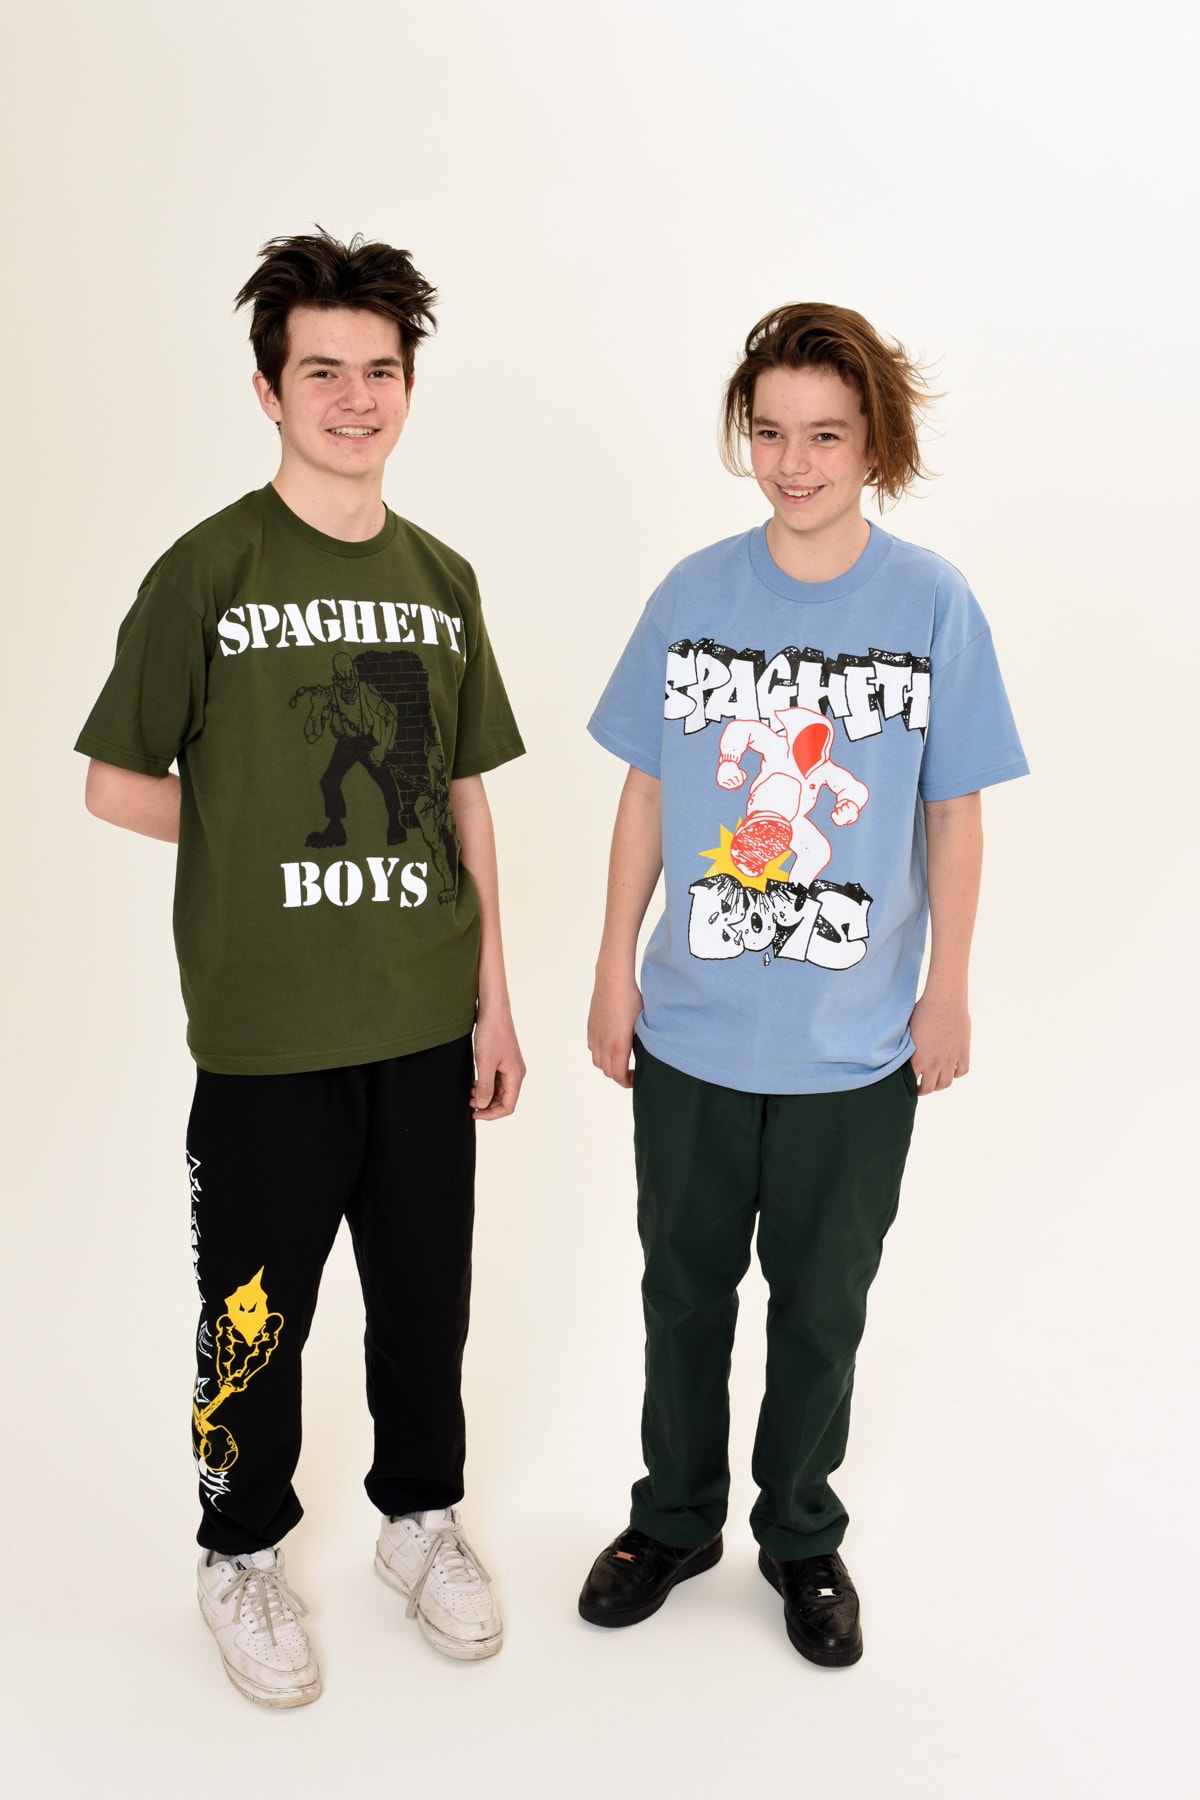 Spaghetti Boys Clothing Collection purchase now